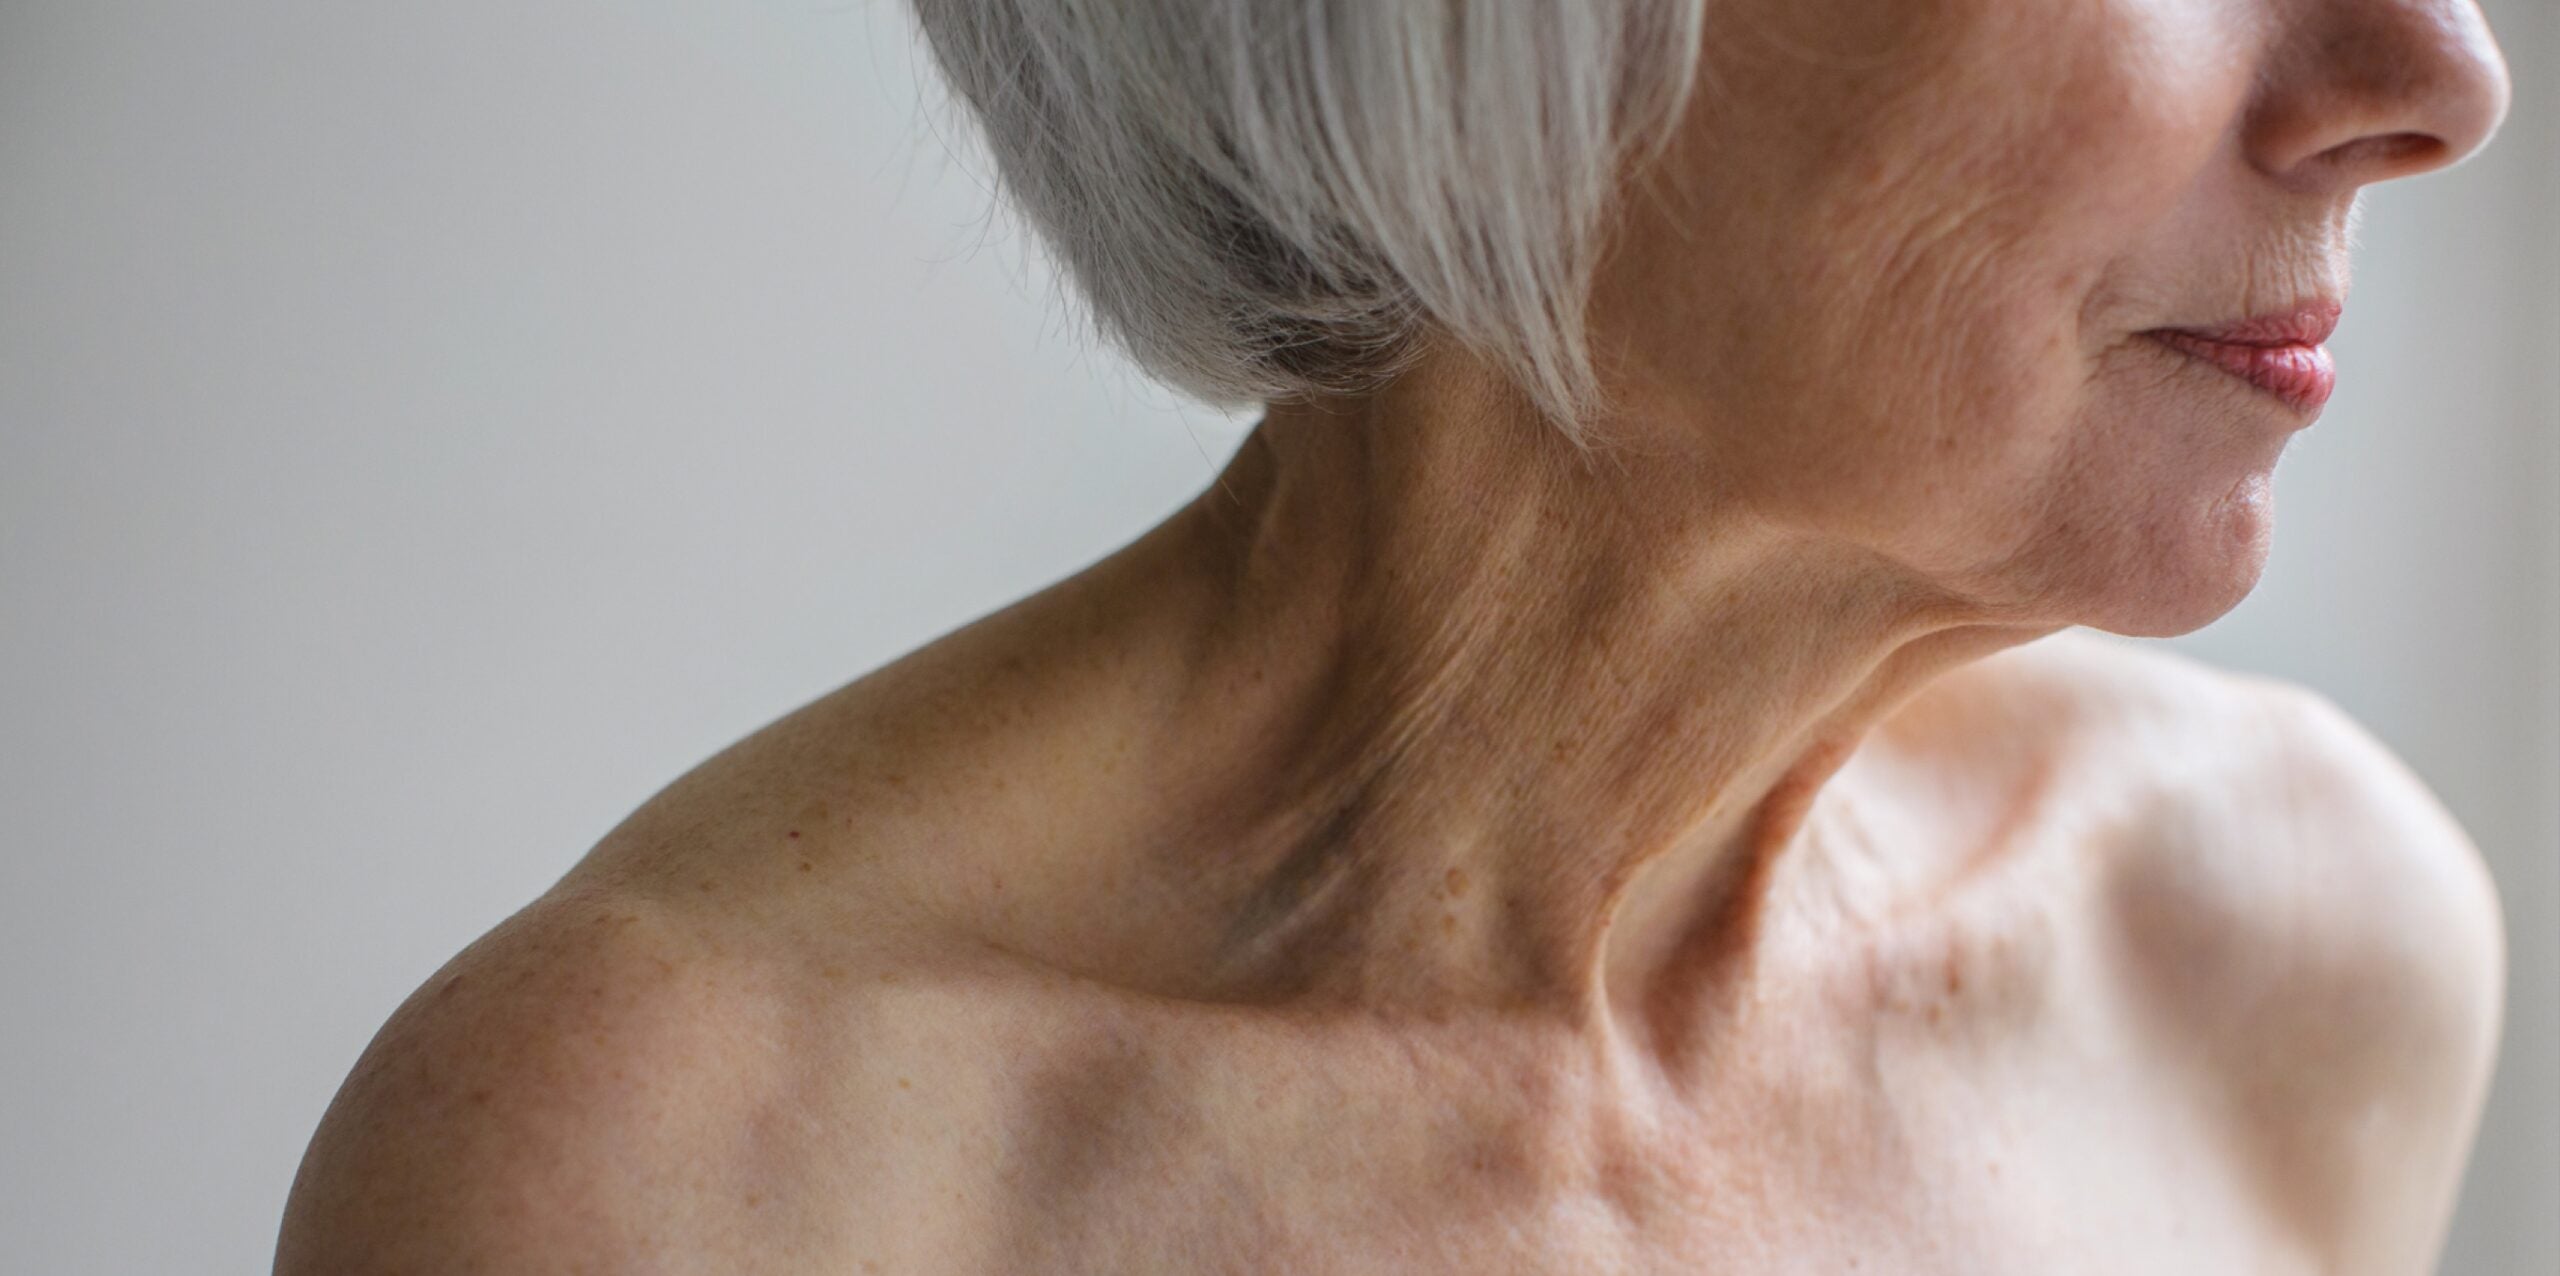 Wrinkle wrap-up, part 4: It’s time to talk neck wrinkles, from neck lifts to tech neck